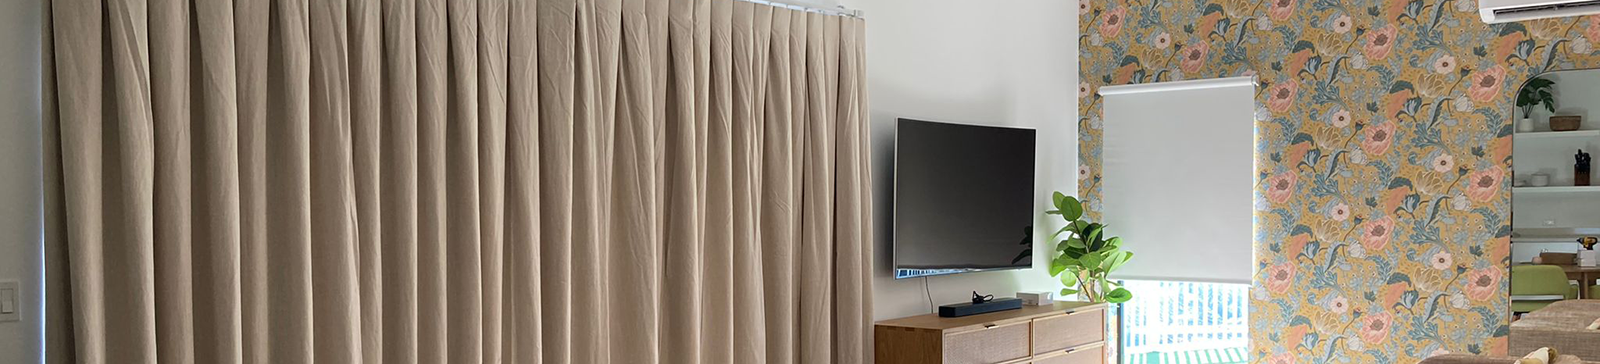 Somfy Motorized Blackout Curtains &amp; Roller Shades in San Jose